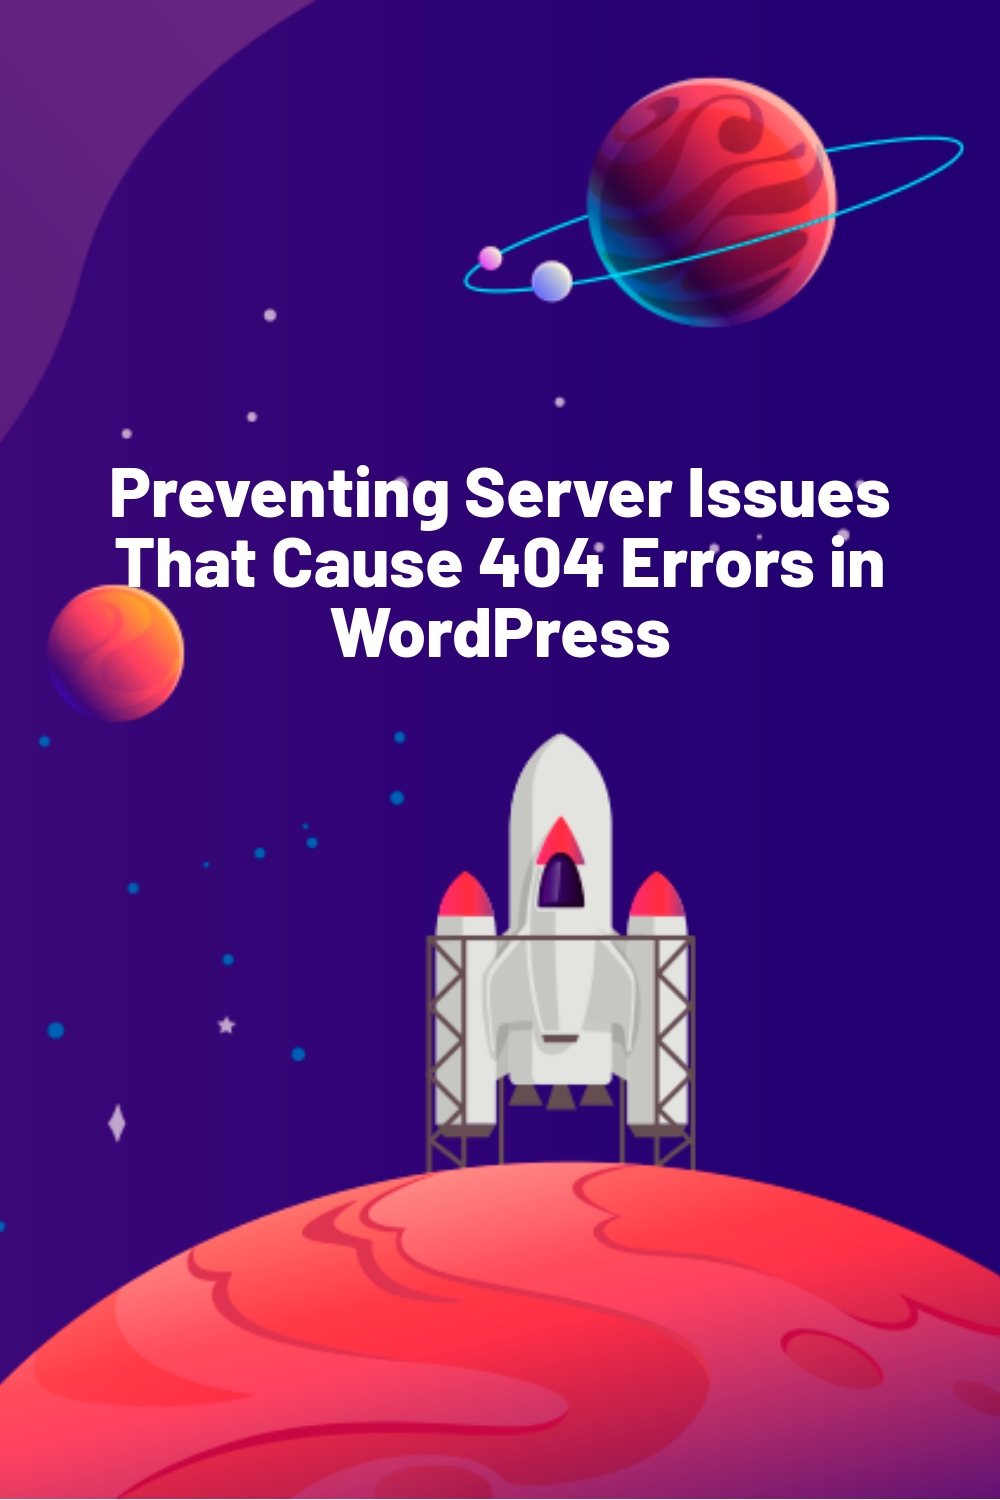 Preventing Server Issues That Cause 404 Errors in WordPress